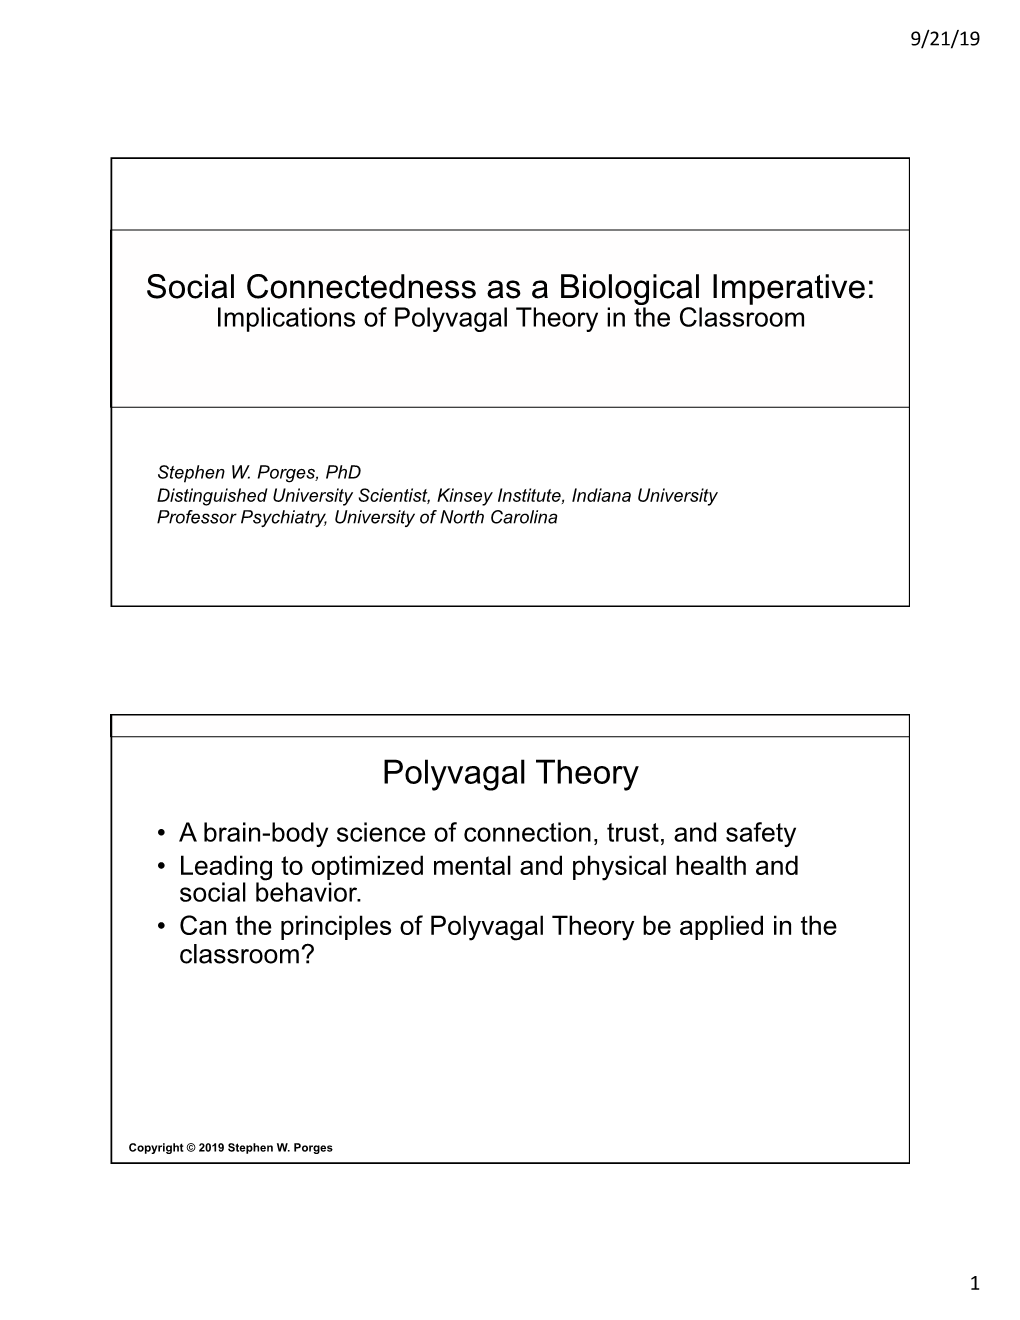 Implications of Polyvagal Theory in the Classroom